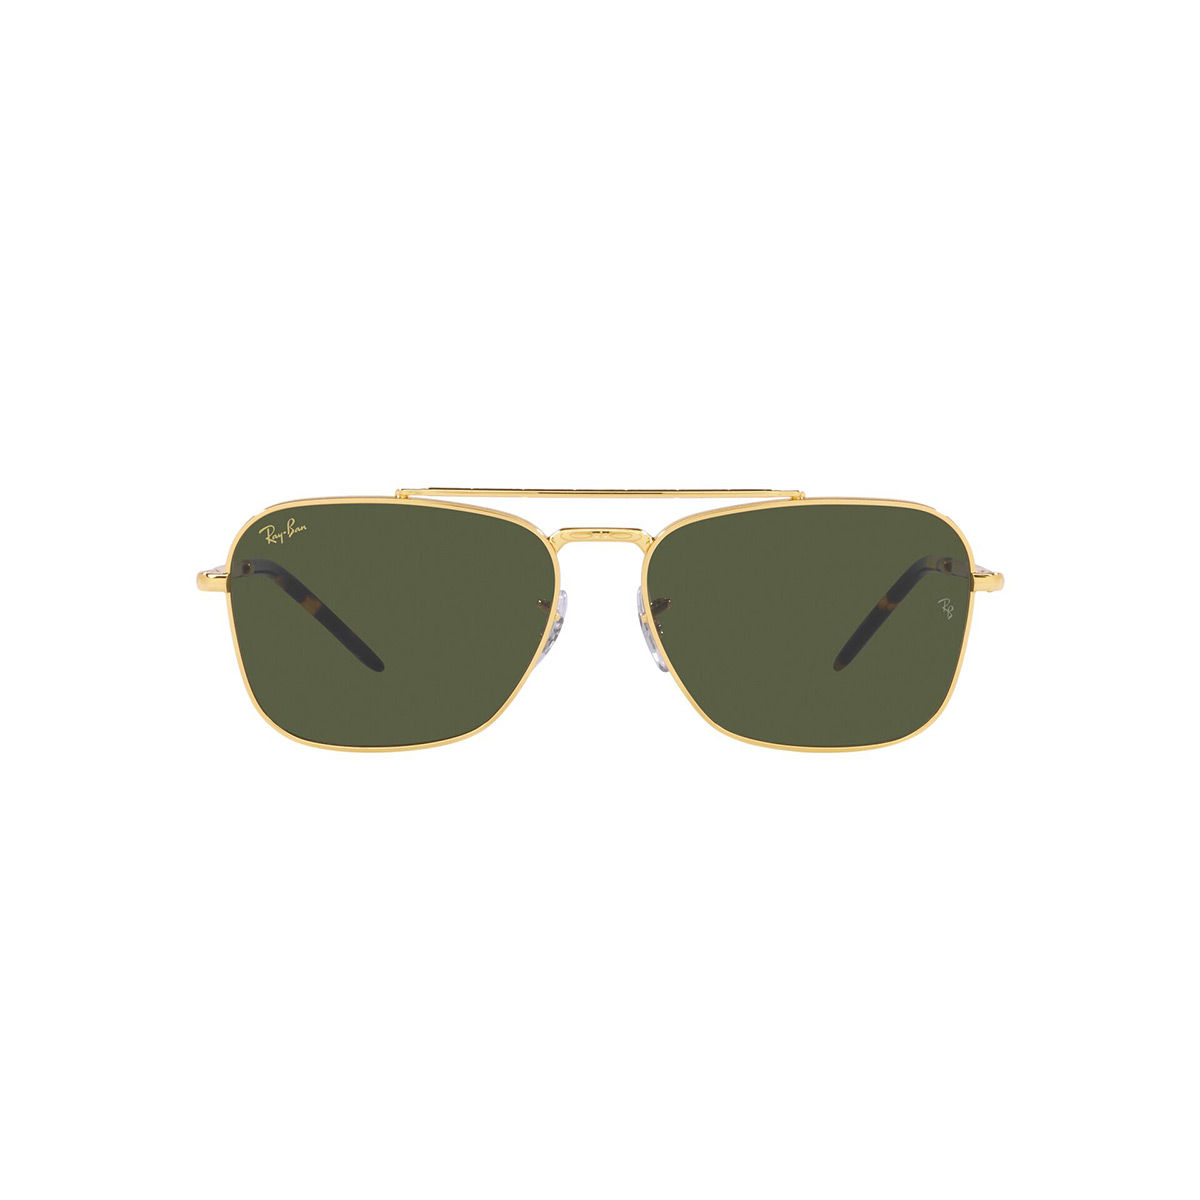 Ray-Ban Discounts and Cash Back for Military, Nurses, & More | ID.me Shop